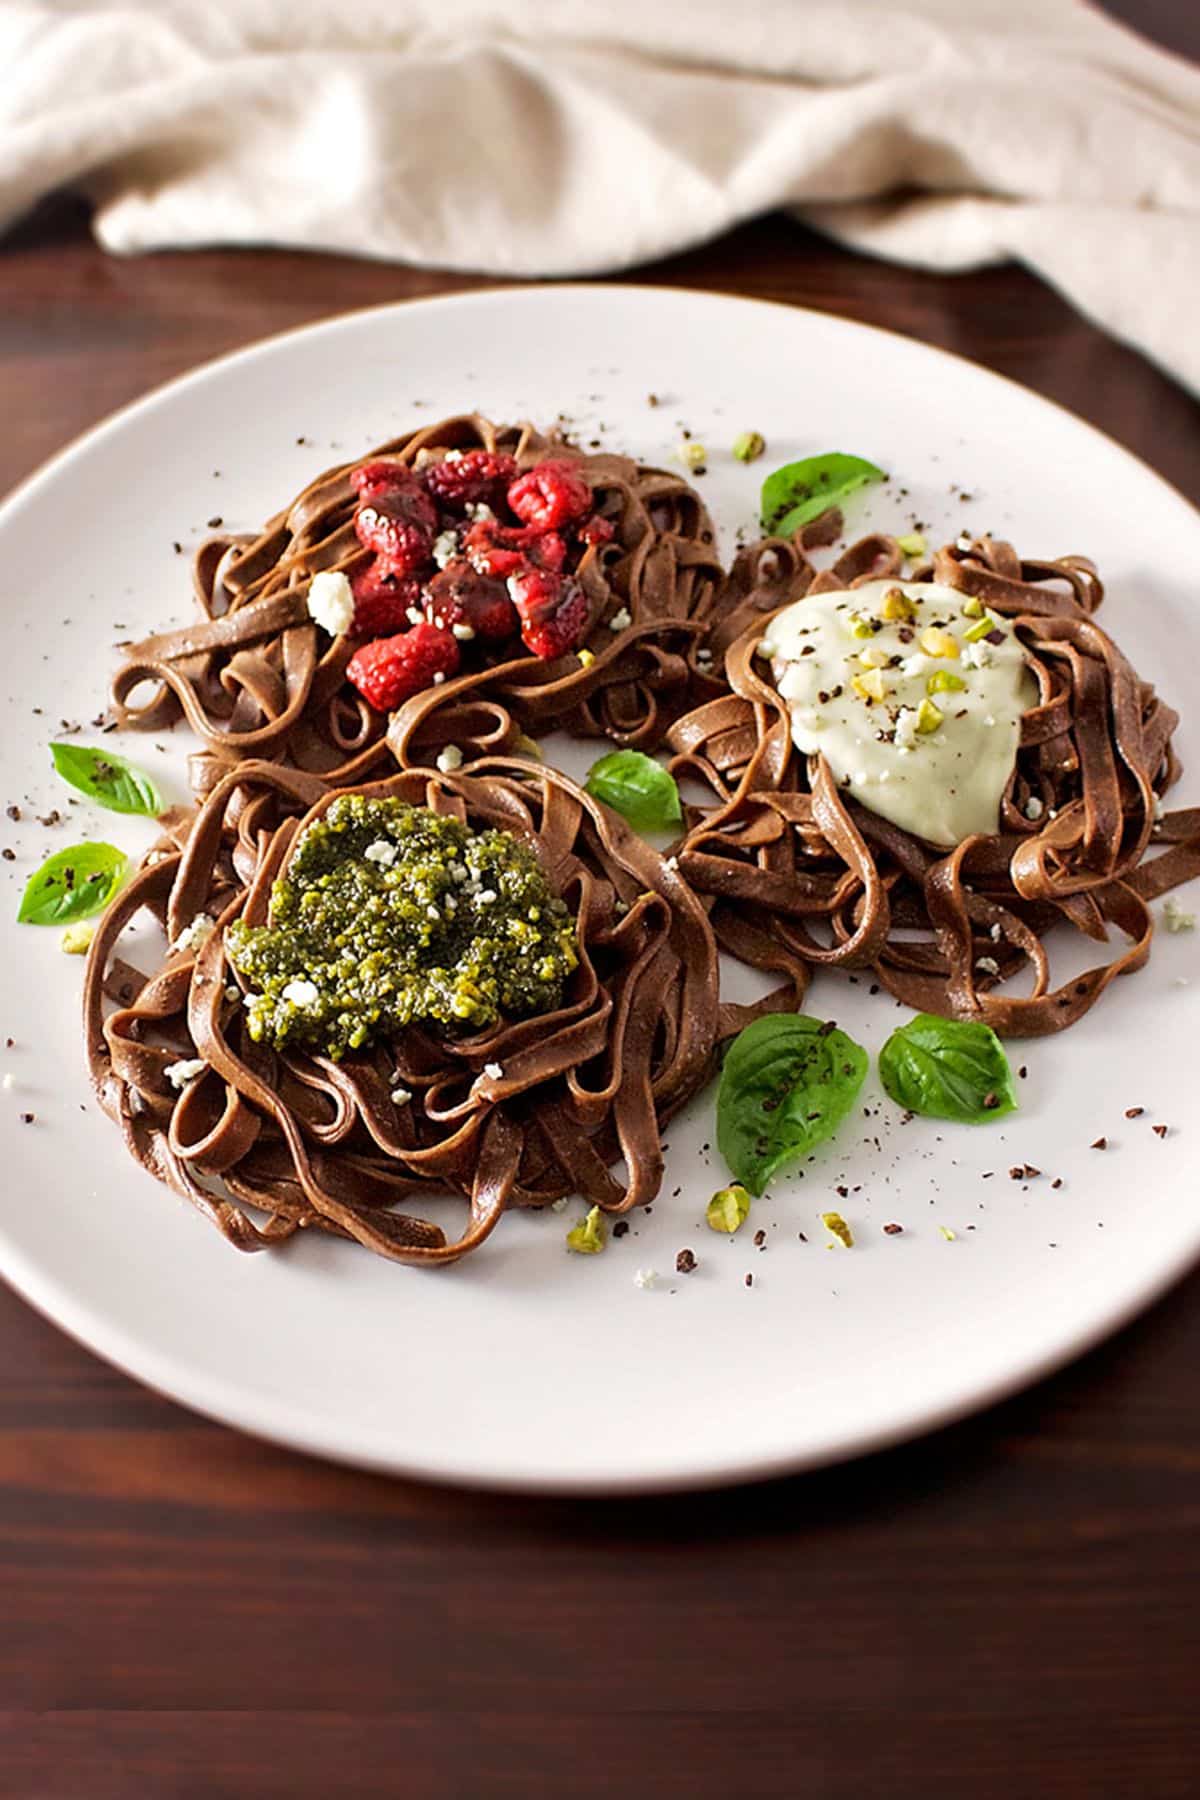 Chocolate Pasta italian dessert with fruits and herbs on a white plate.